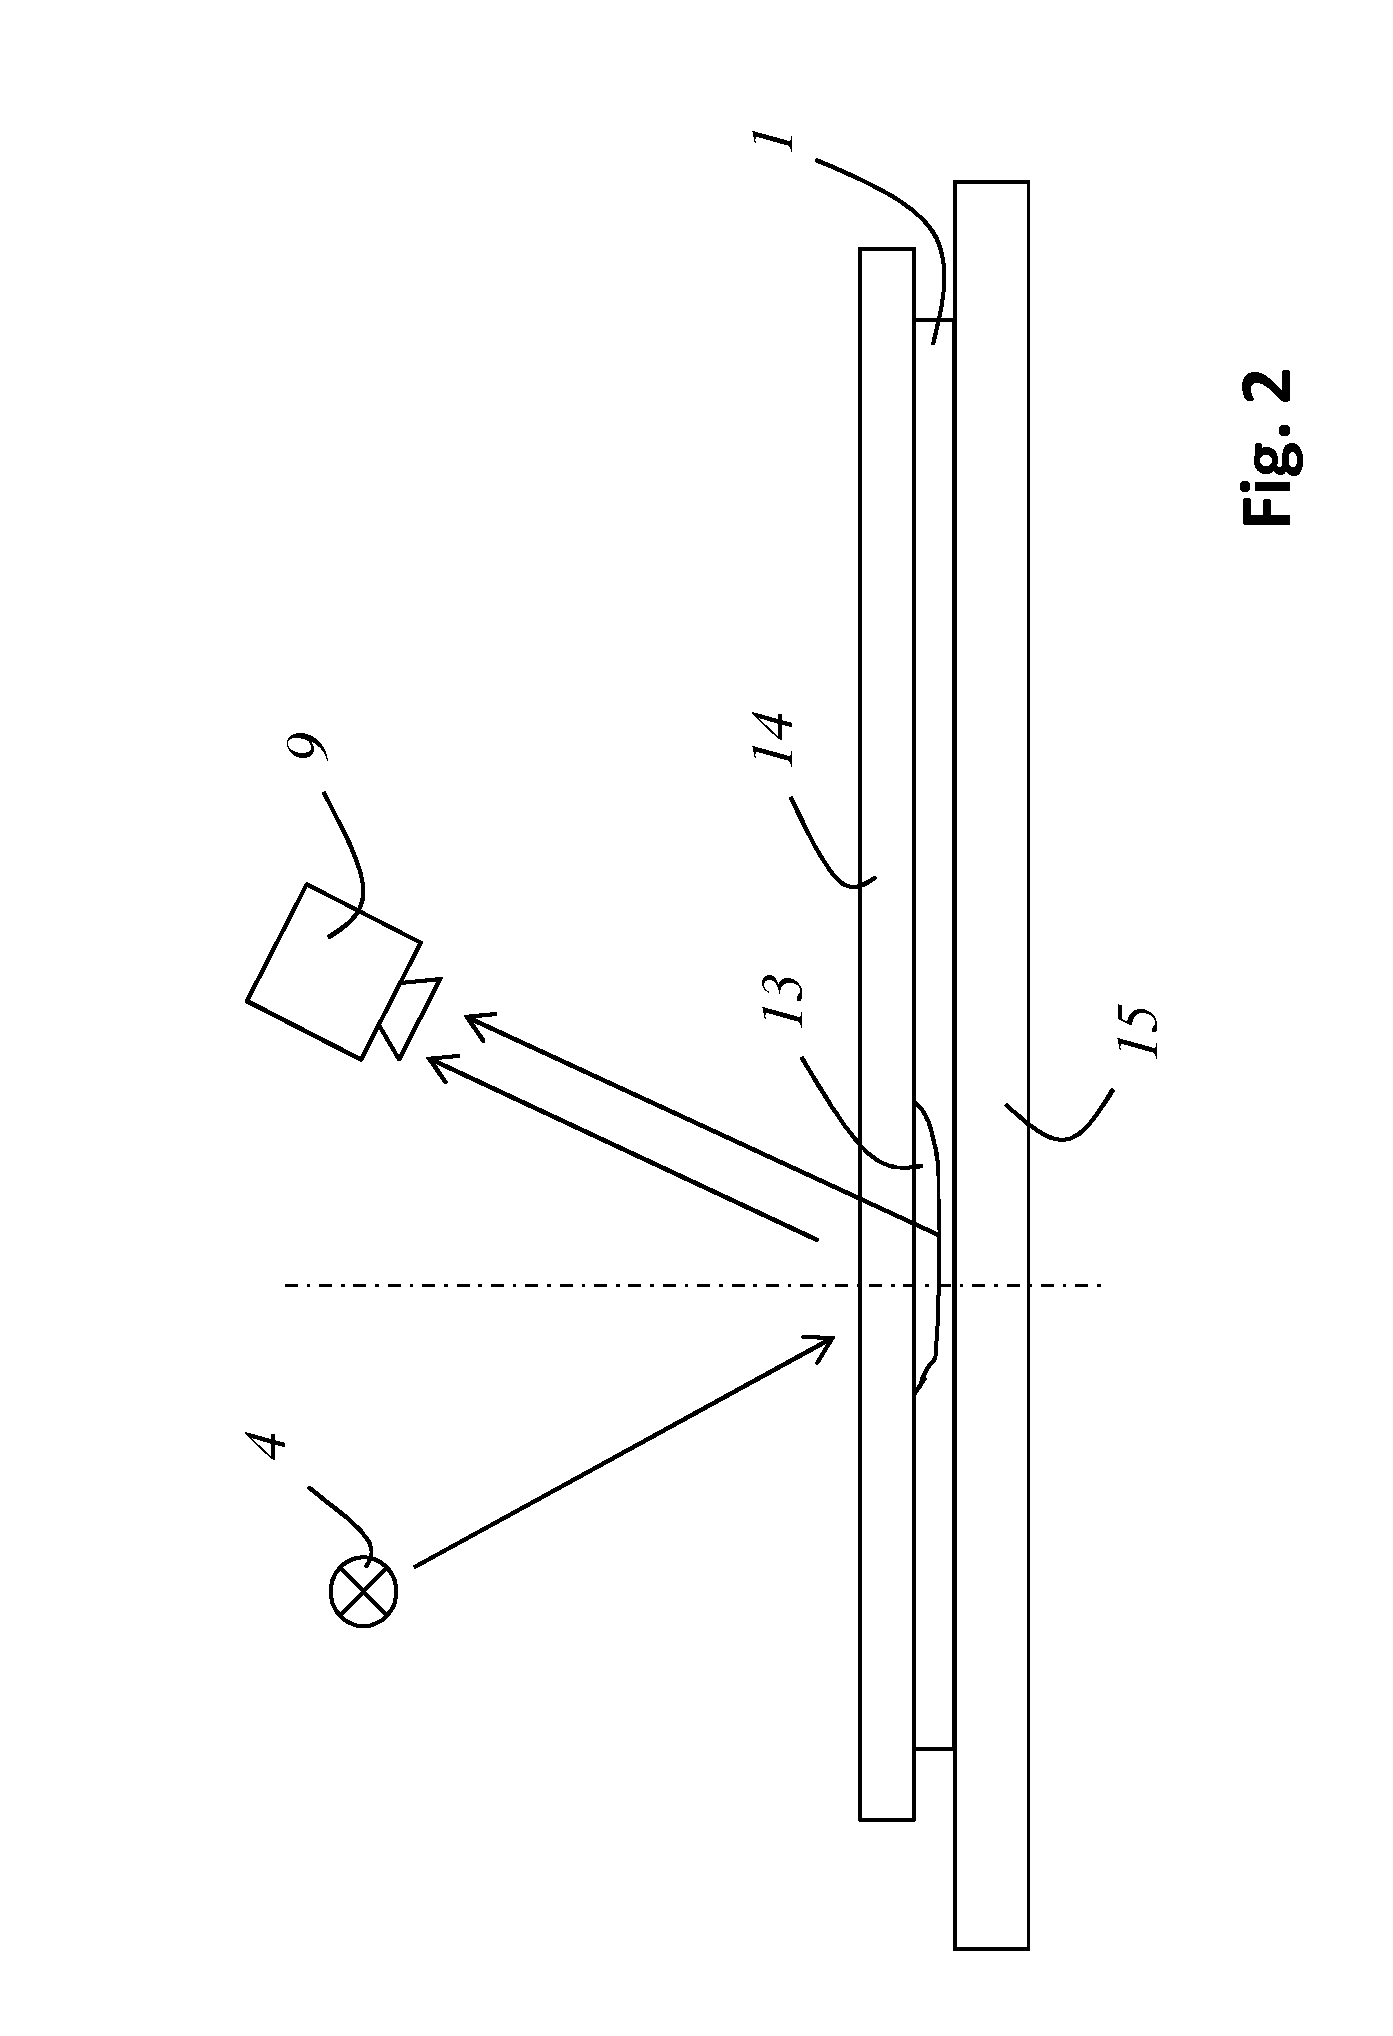 Method in the preparation of samples for microscopic examination, and apparatus for checking the coverslipping quality of samples